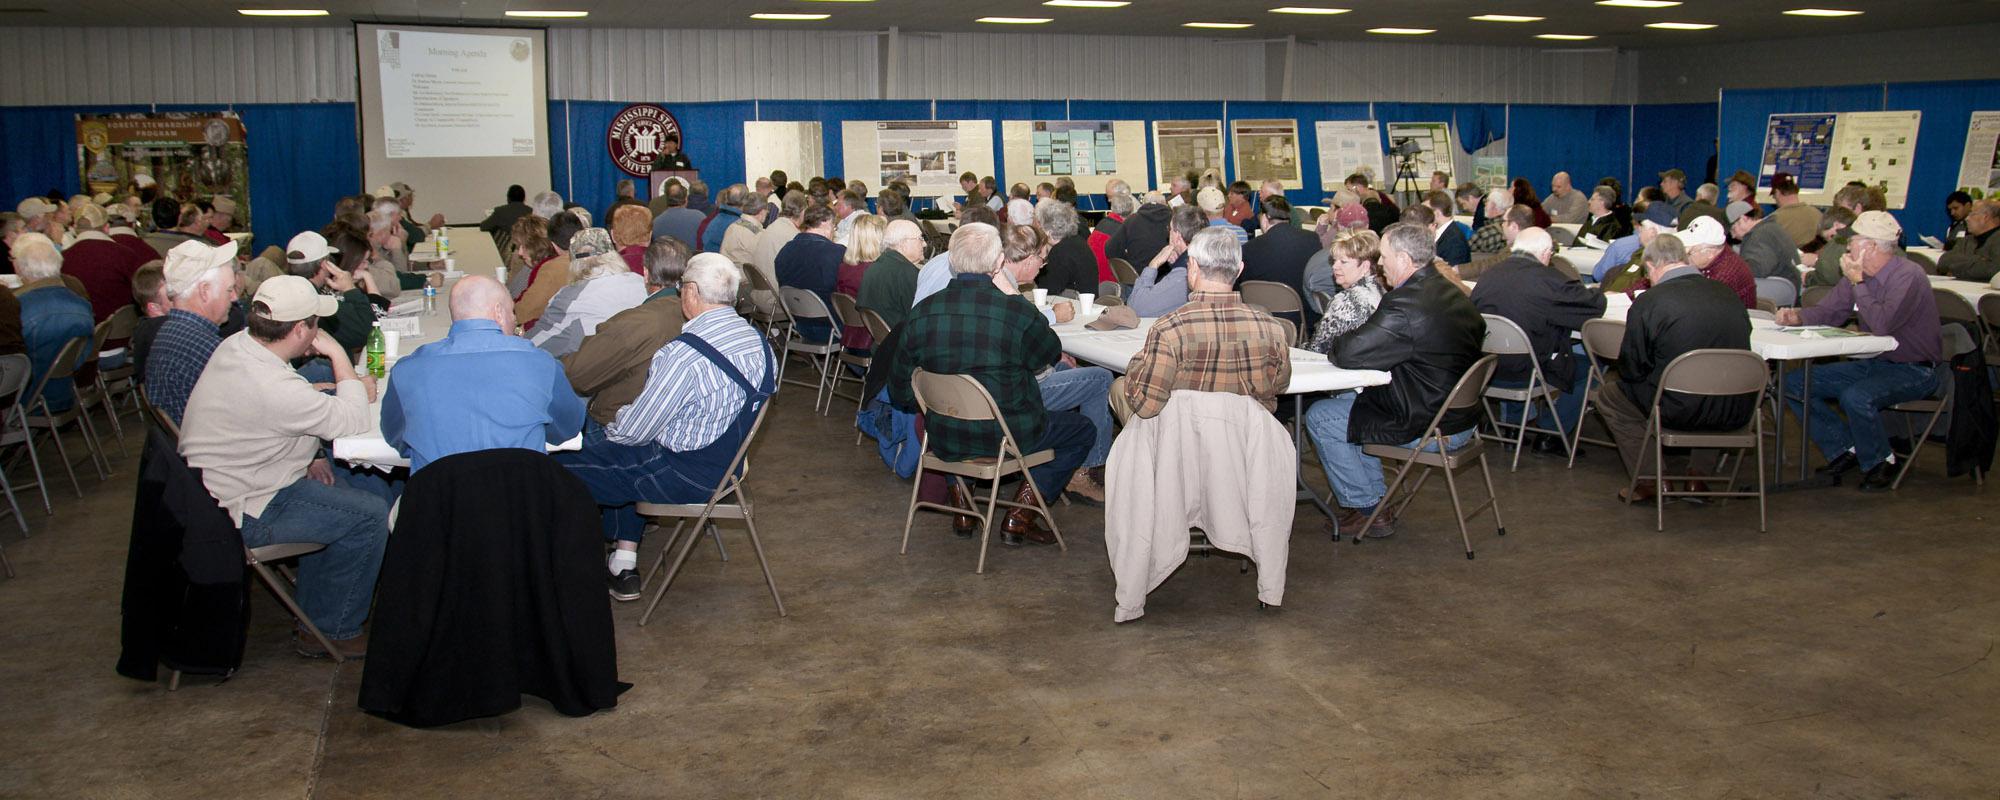 This year’s attendance at the North Mississippi Producer Advisory Council was the largest in recent history, with more than 300 attendees. (Photo by Scott Corey)